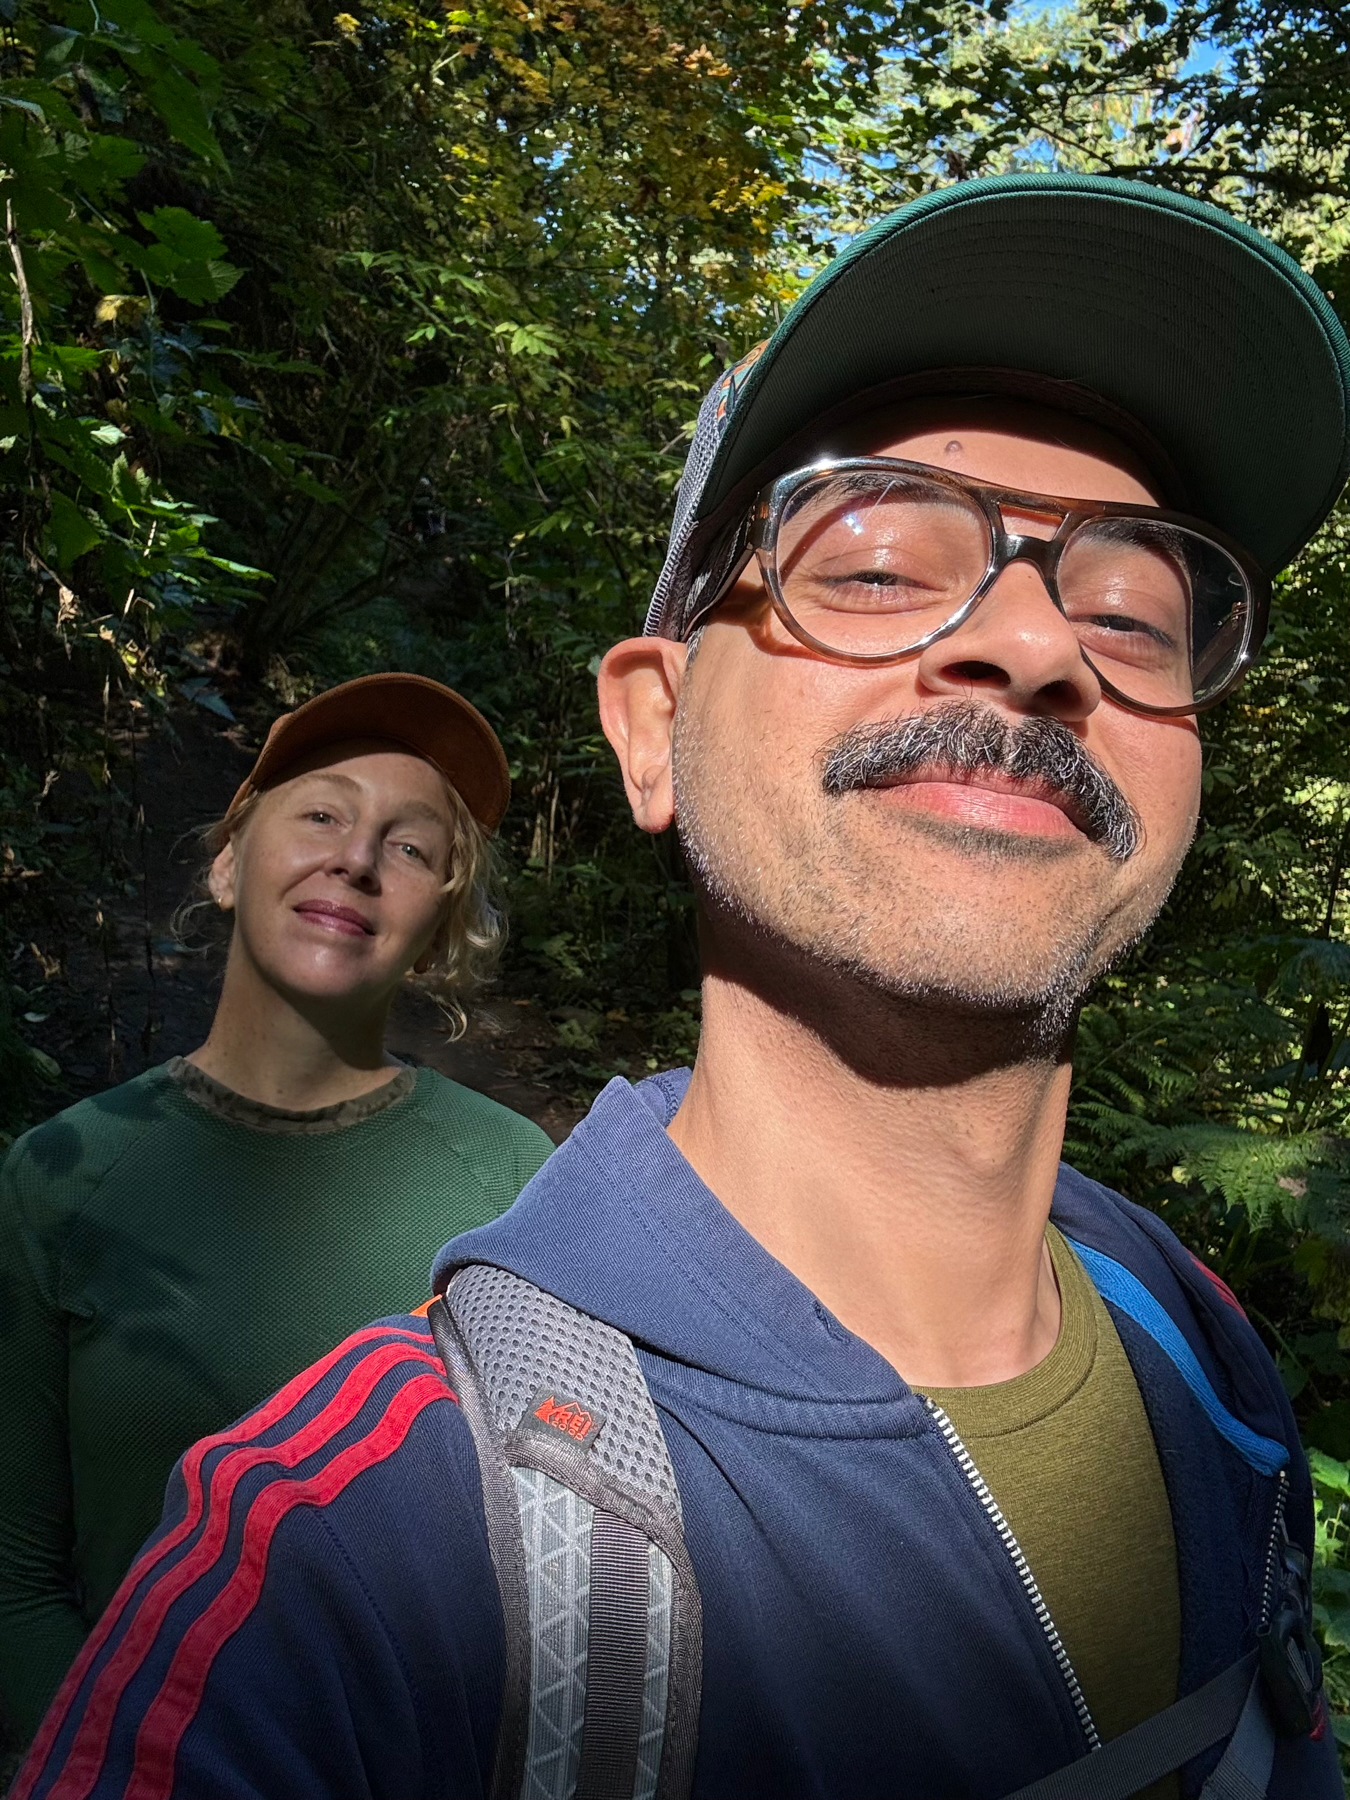 Selfie of two people in a sun speckled forest